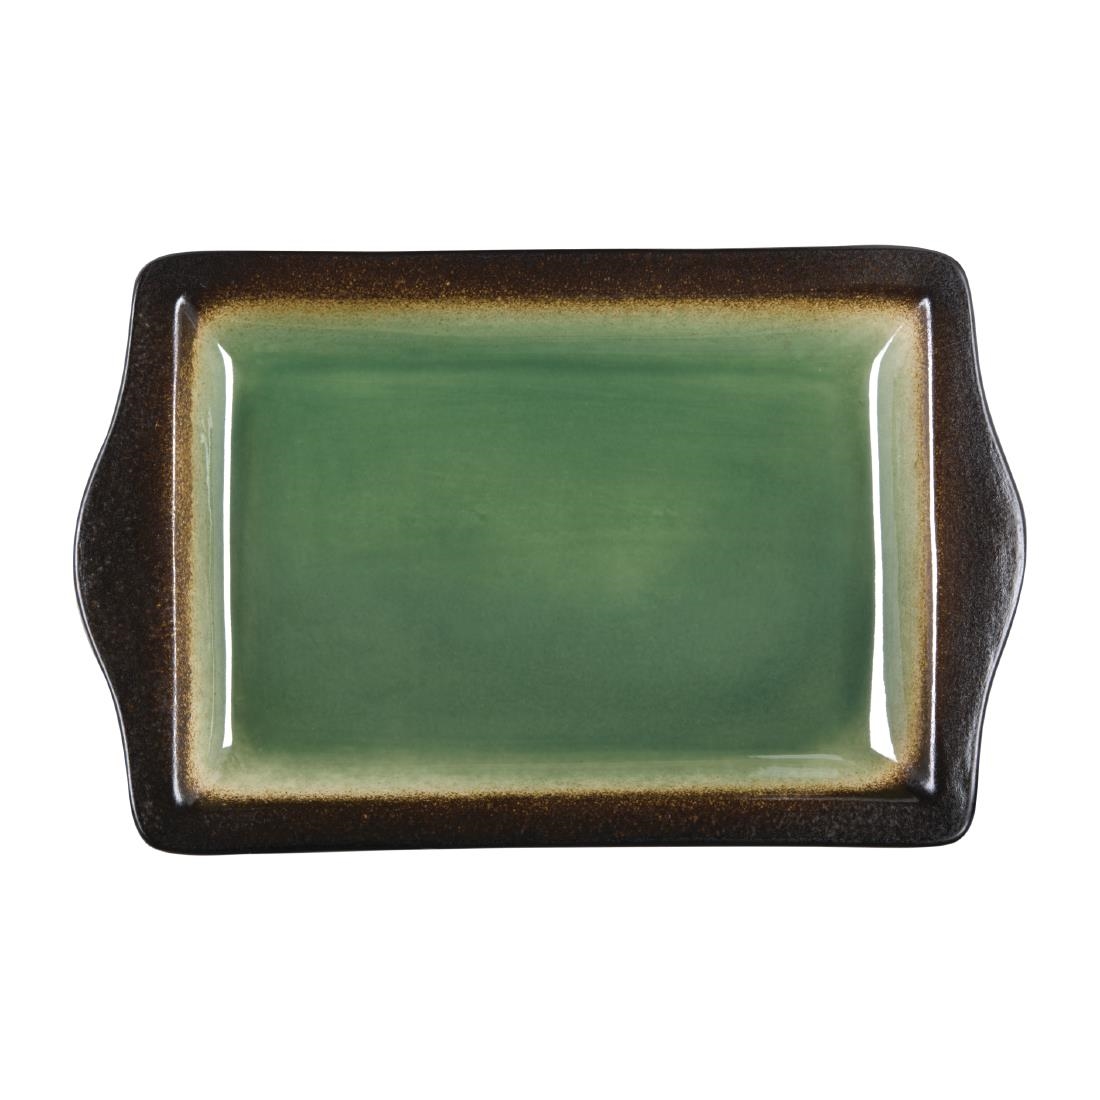 Olympia Nomi Platter Green 283mm (Pack of 6)